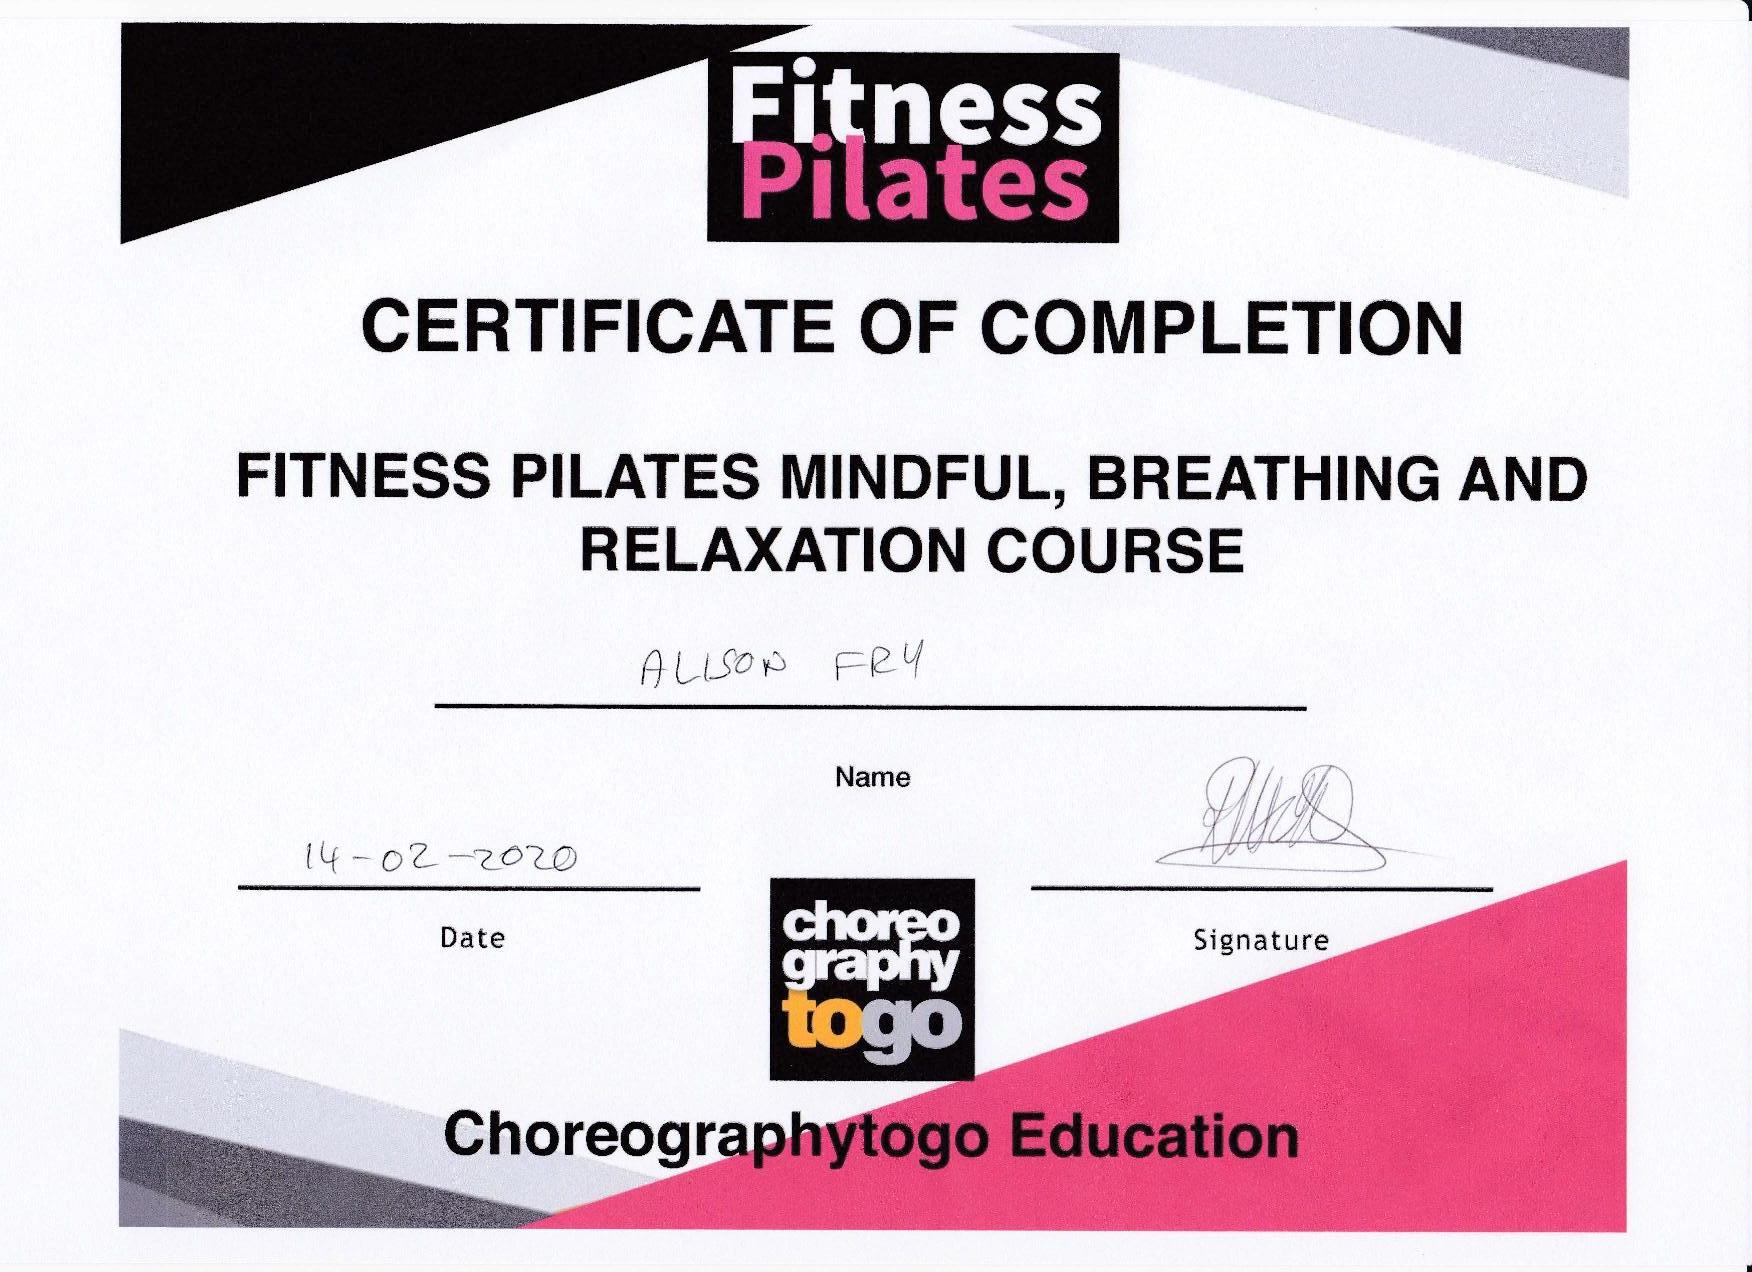 Fitness Pilates Mindful Breathing and Relaxation Certification - 14th February 2020